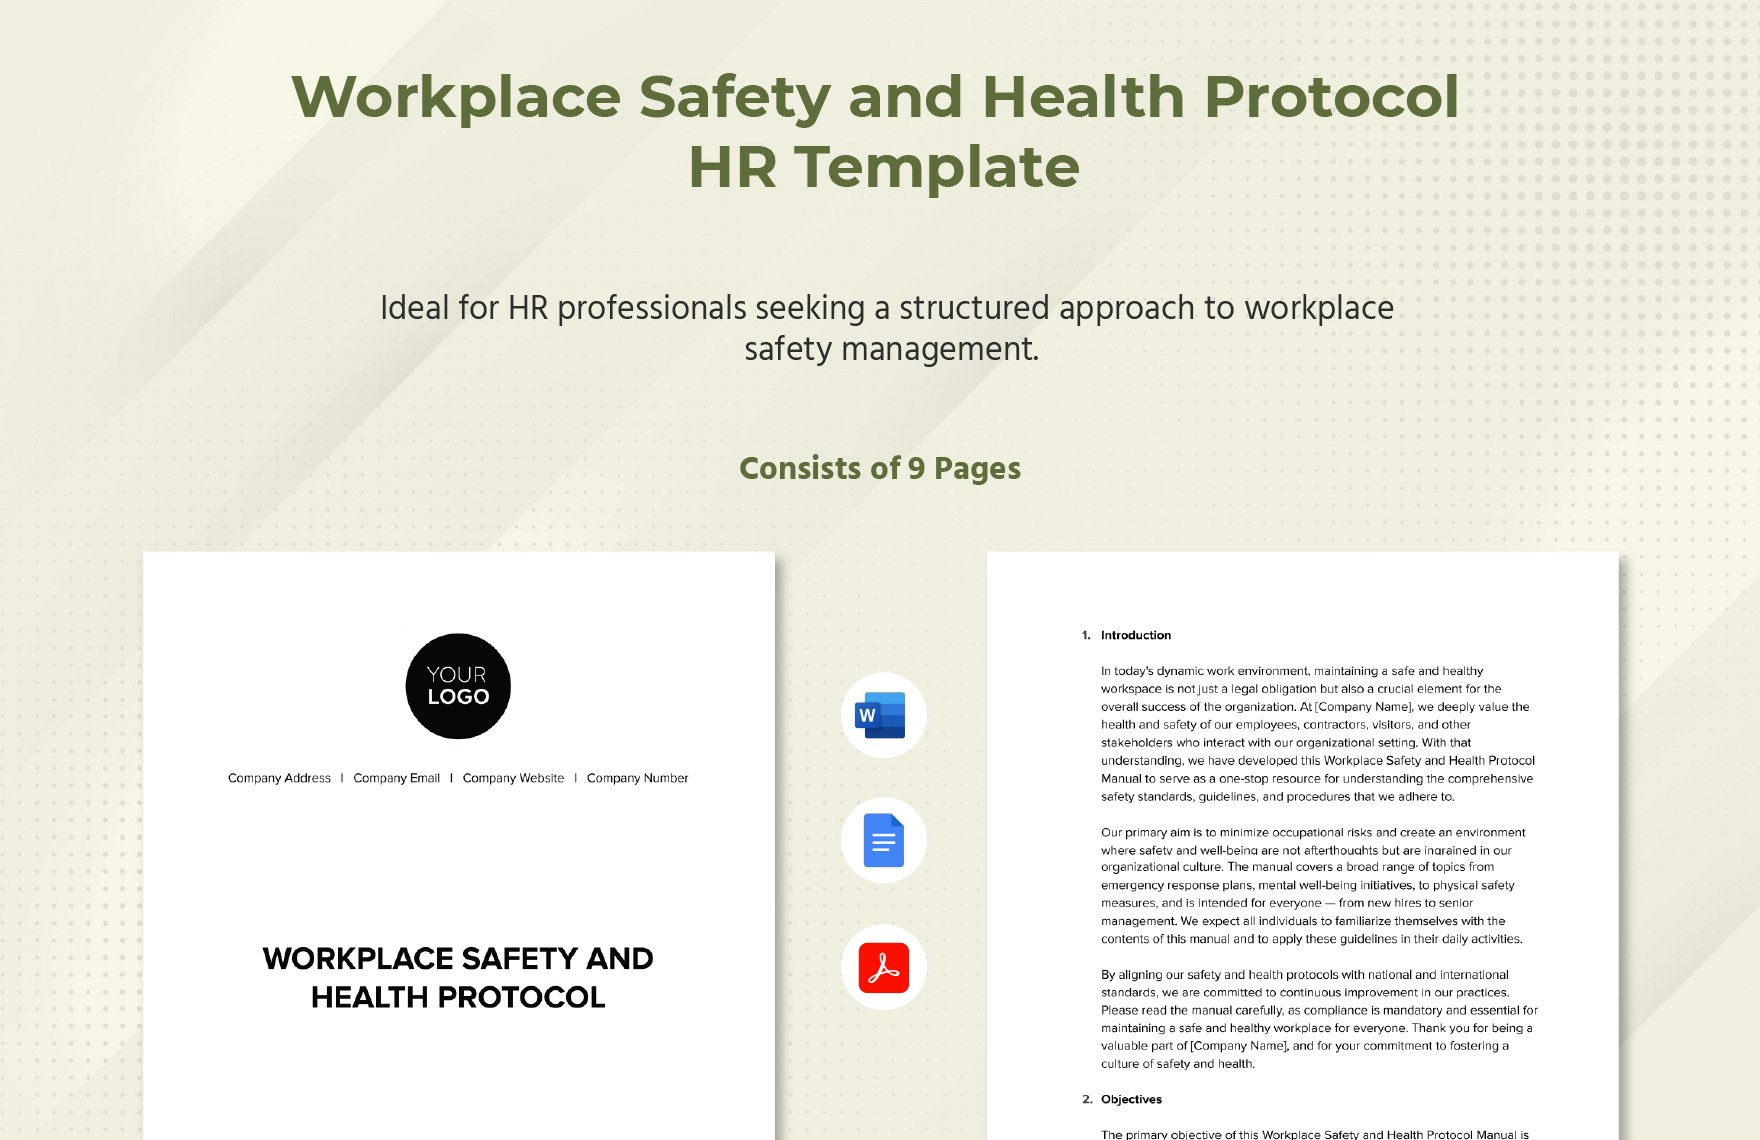 Workplace Safety and Health Protocol HR Template